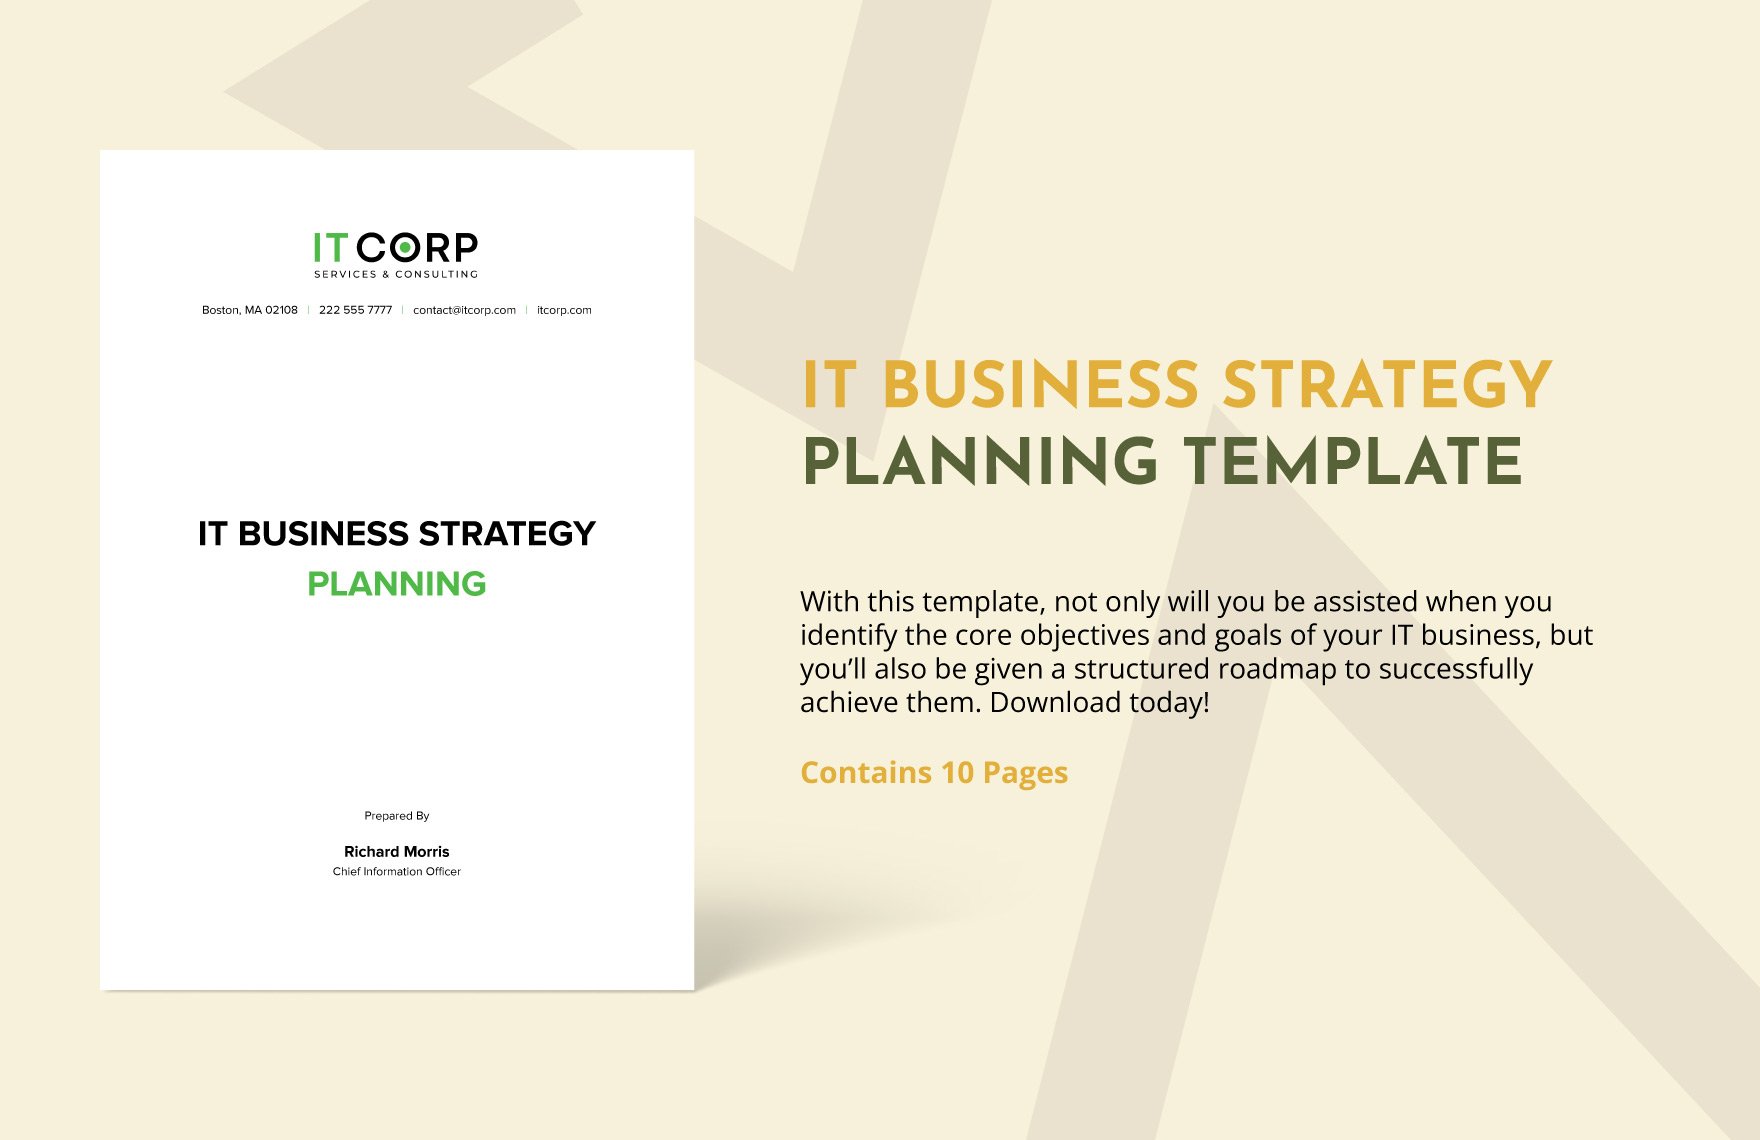 IT Business Strategy Planning Template